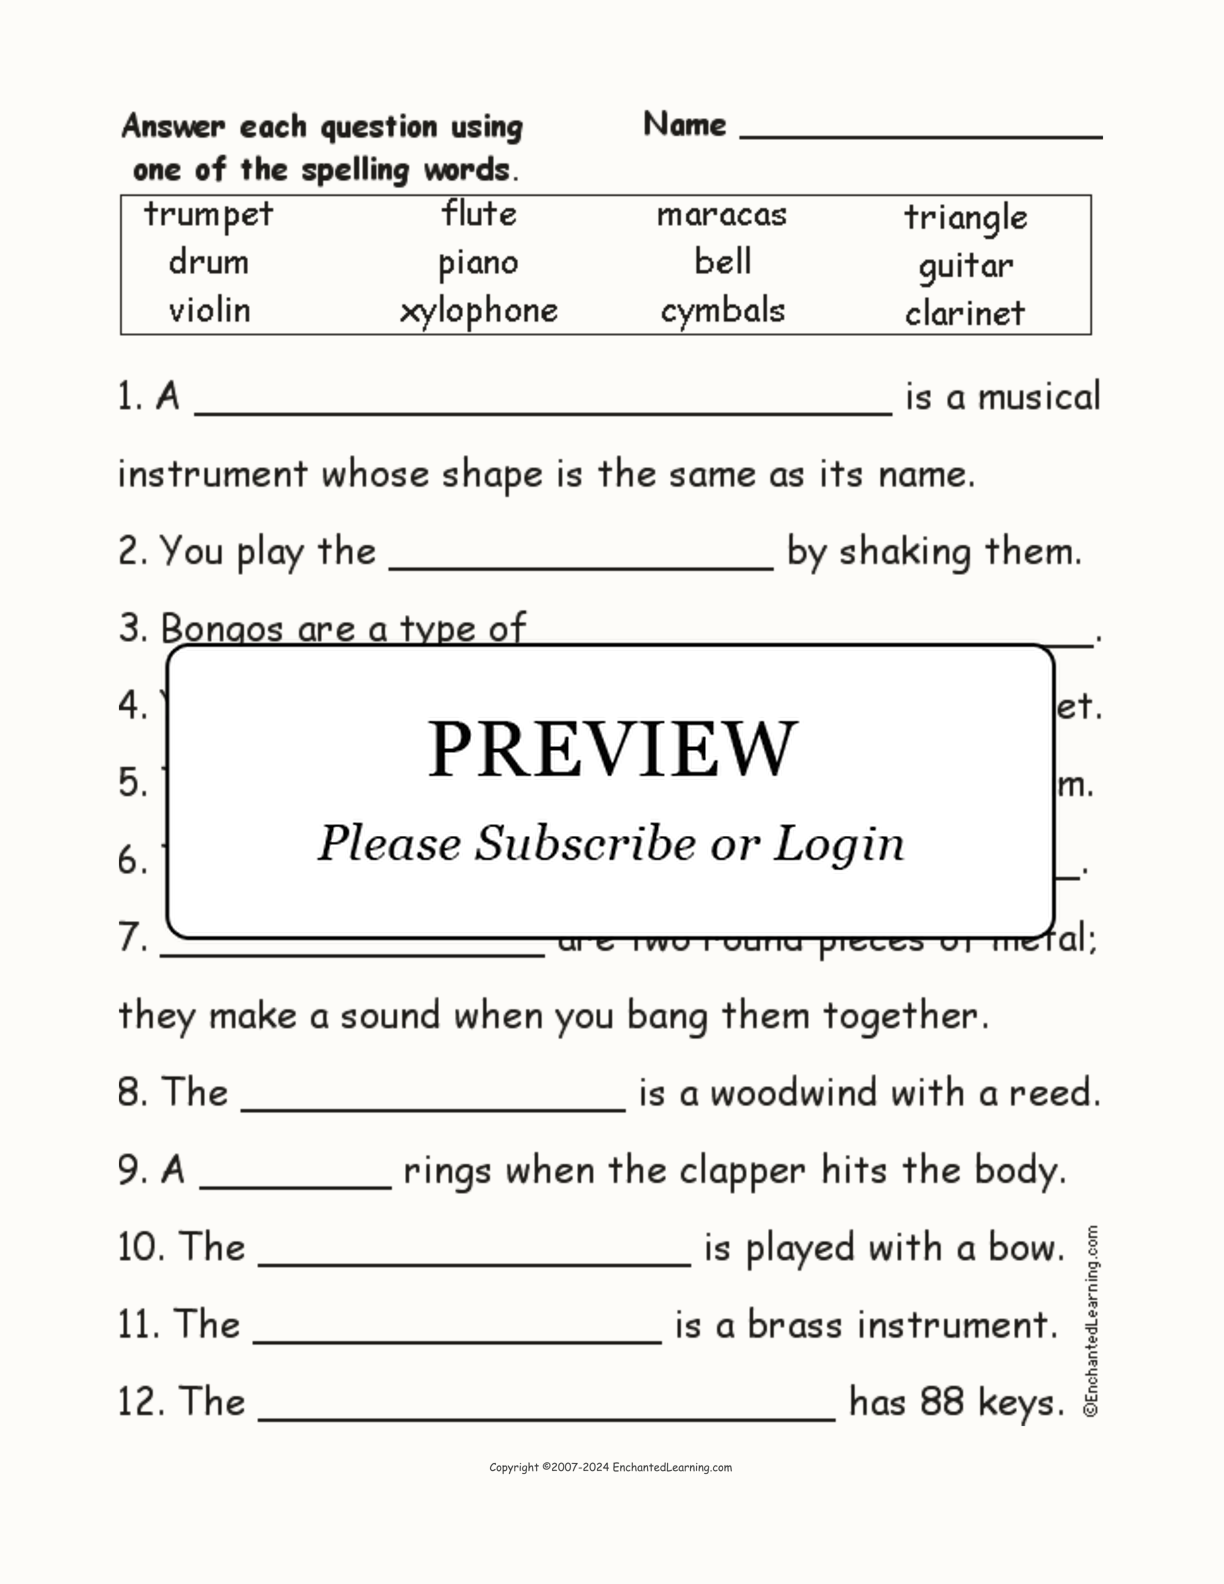 Musical Instruments: Spelling Word Questions interactive worksheet page 1